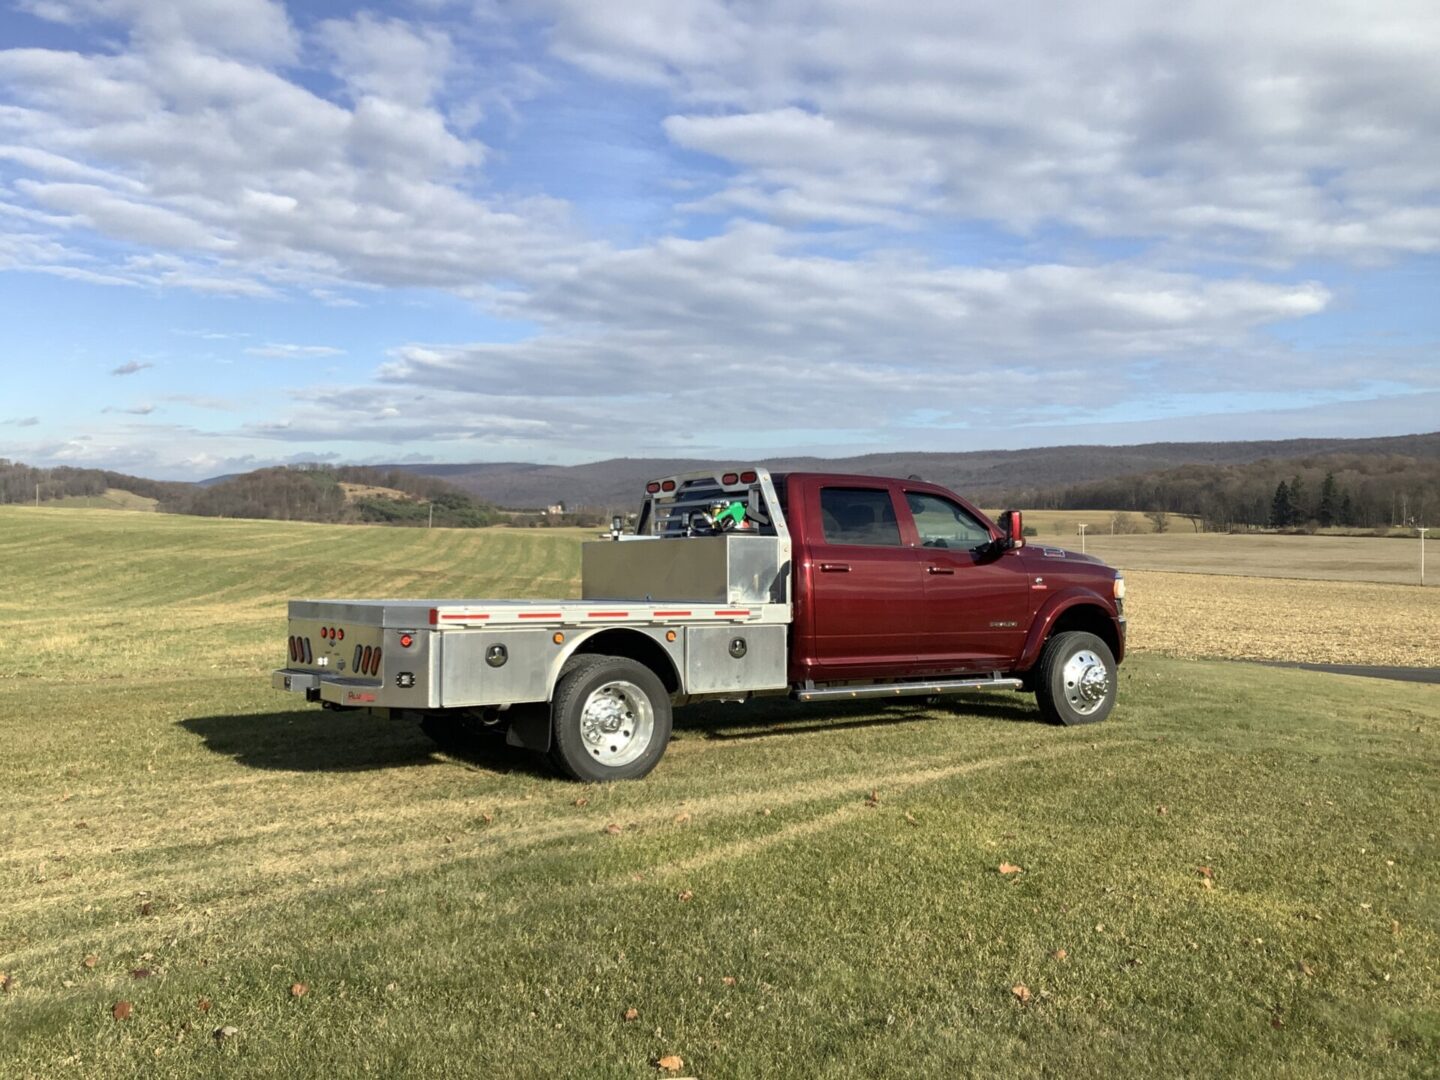 A flatbed truck parked on a grassy field with clear skies in the background.